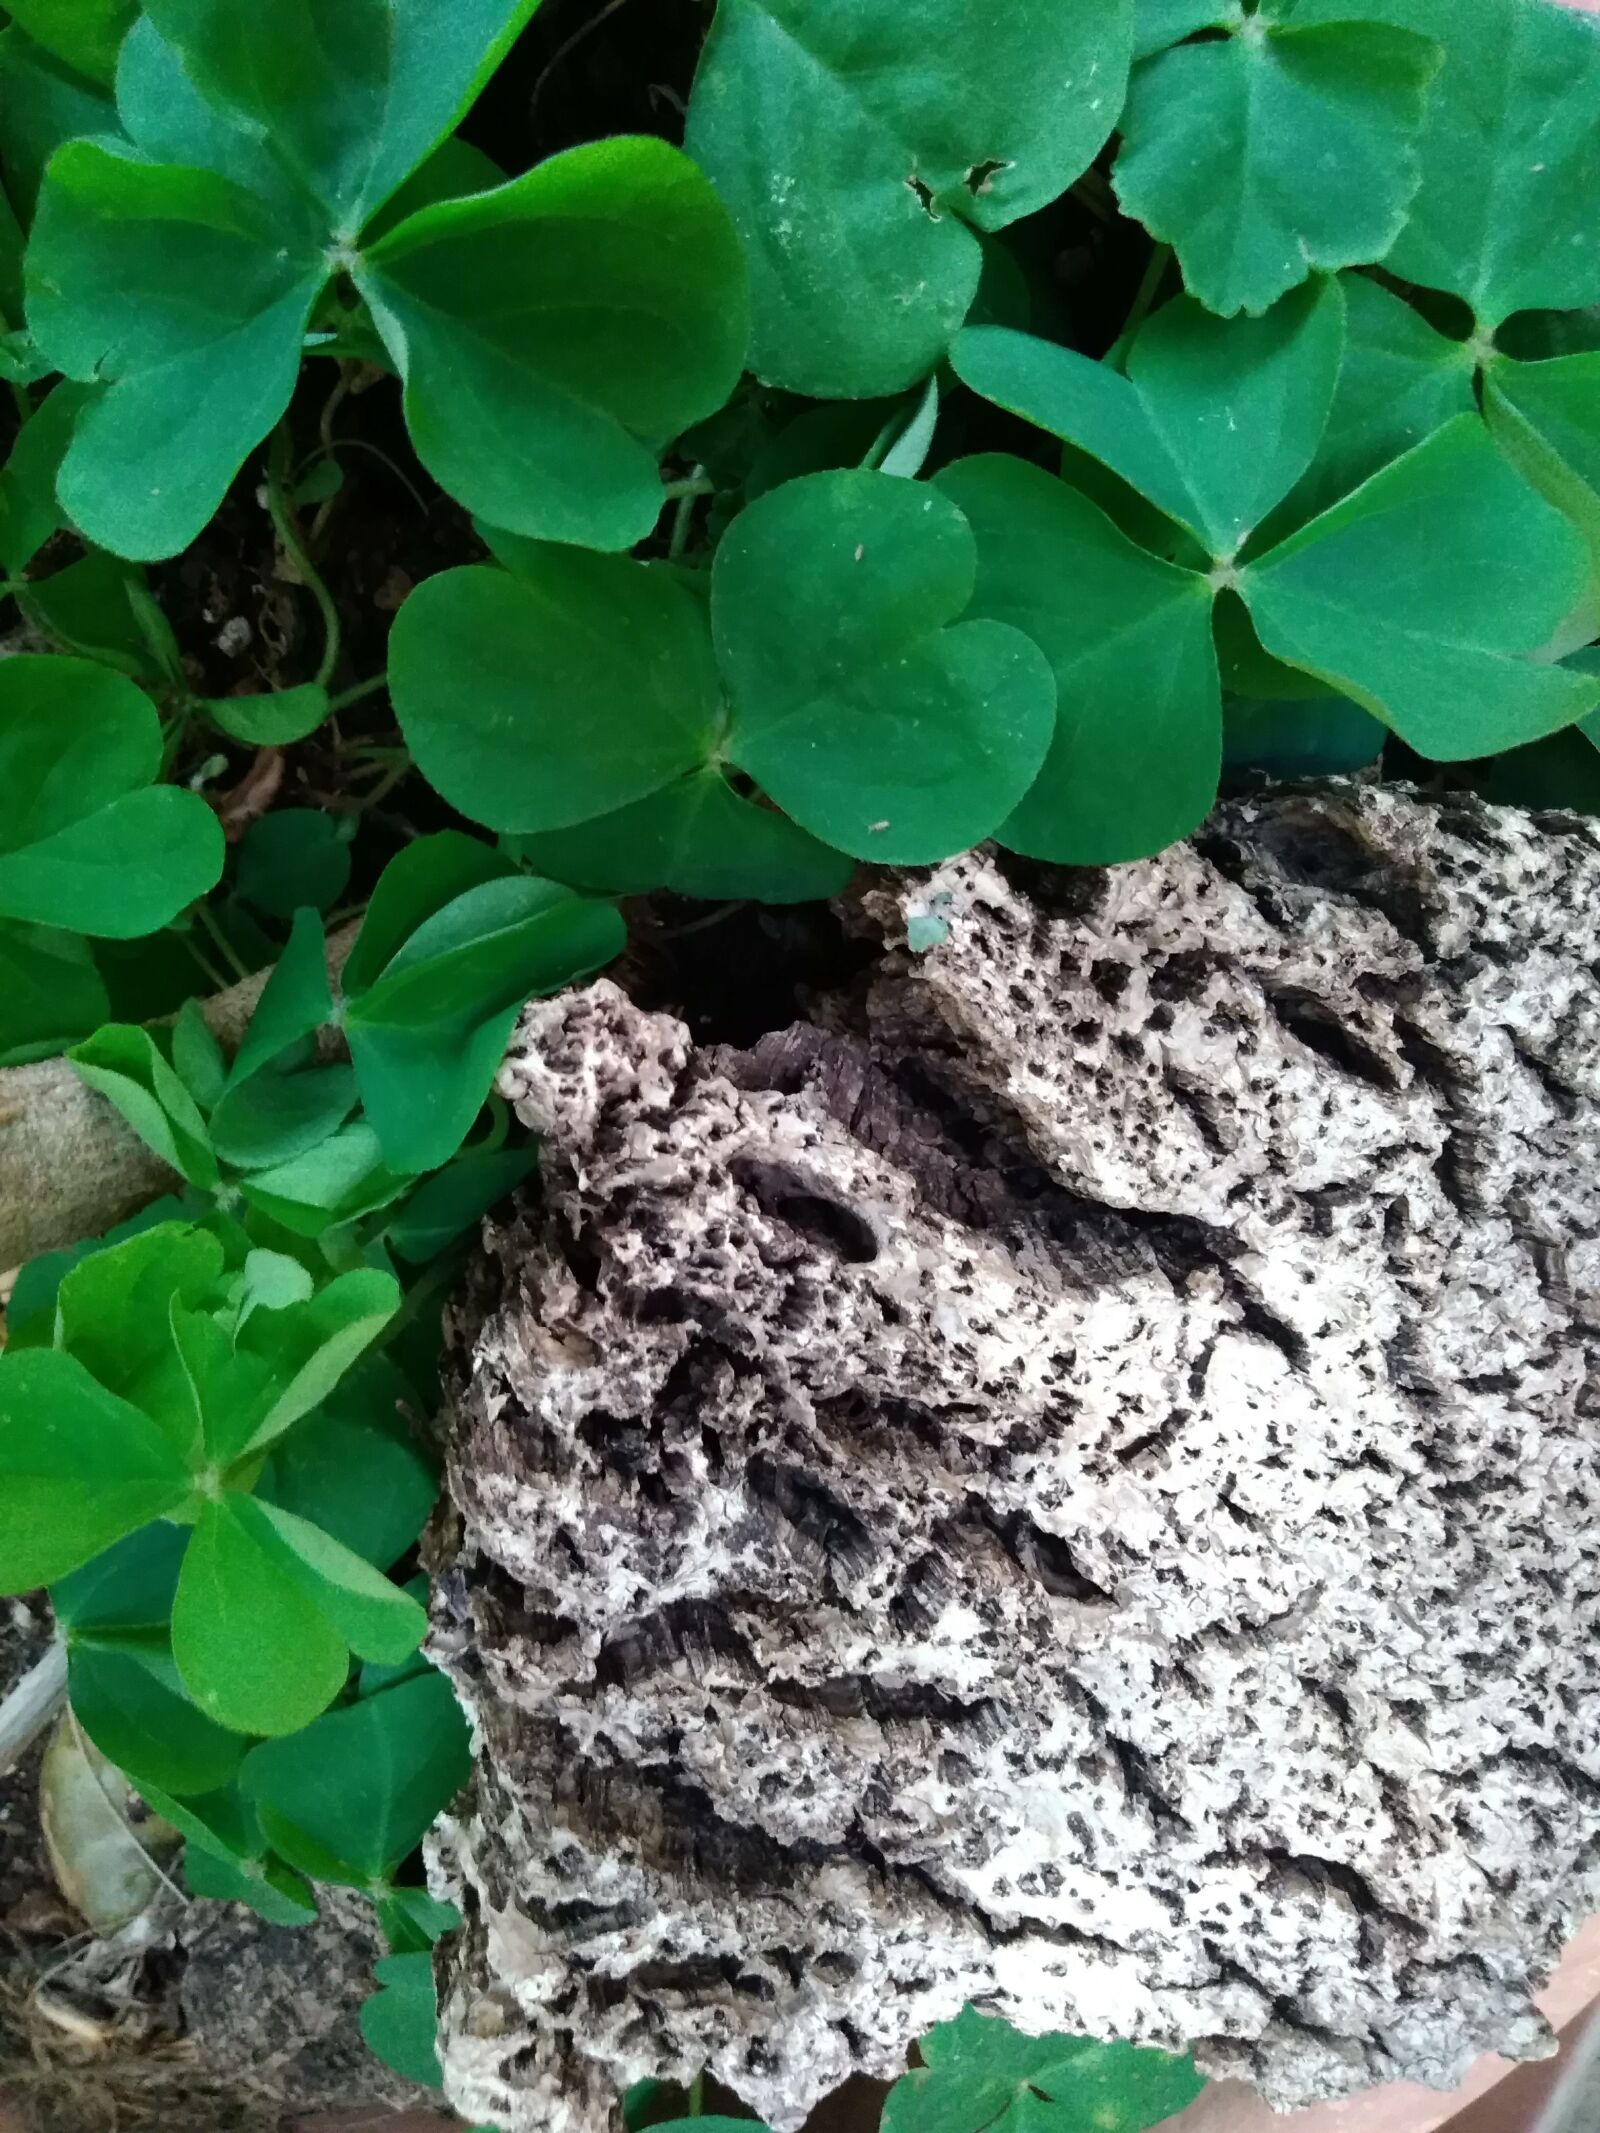 HUAWEI GR3 2017 sample photo. Clover, green, plant photography